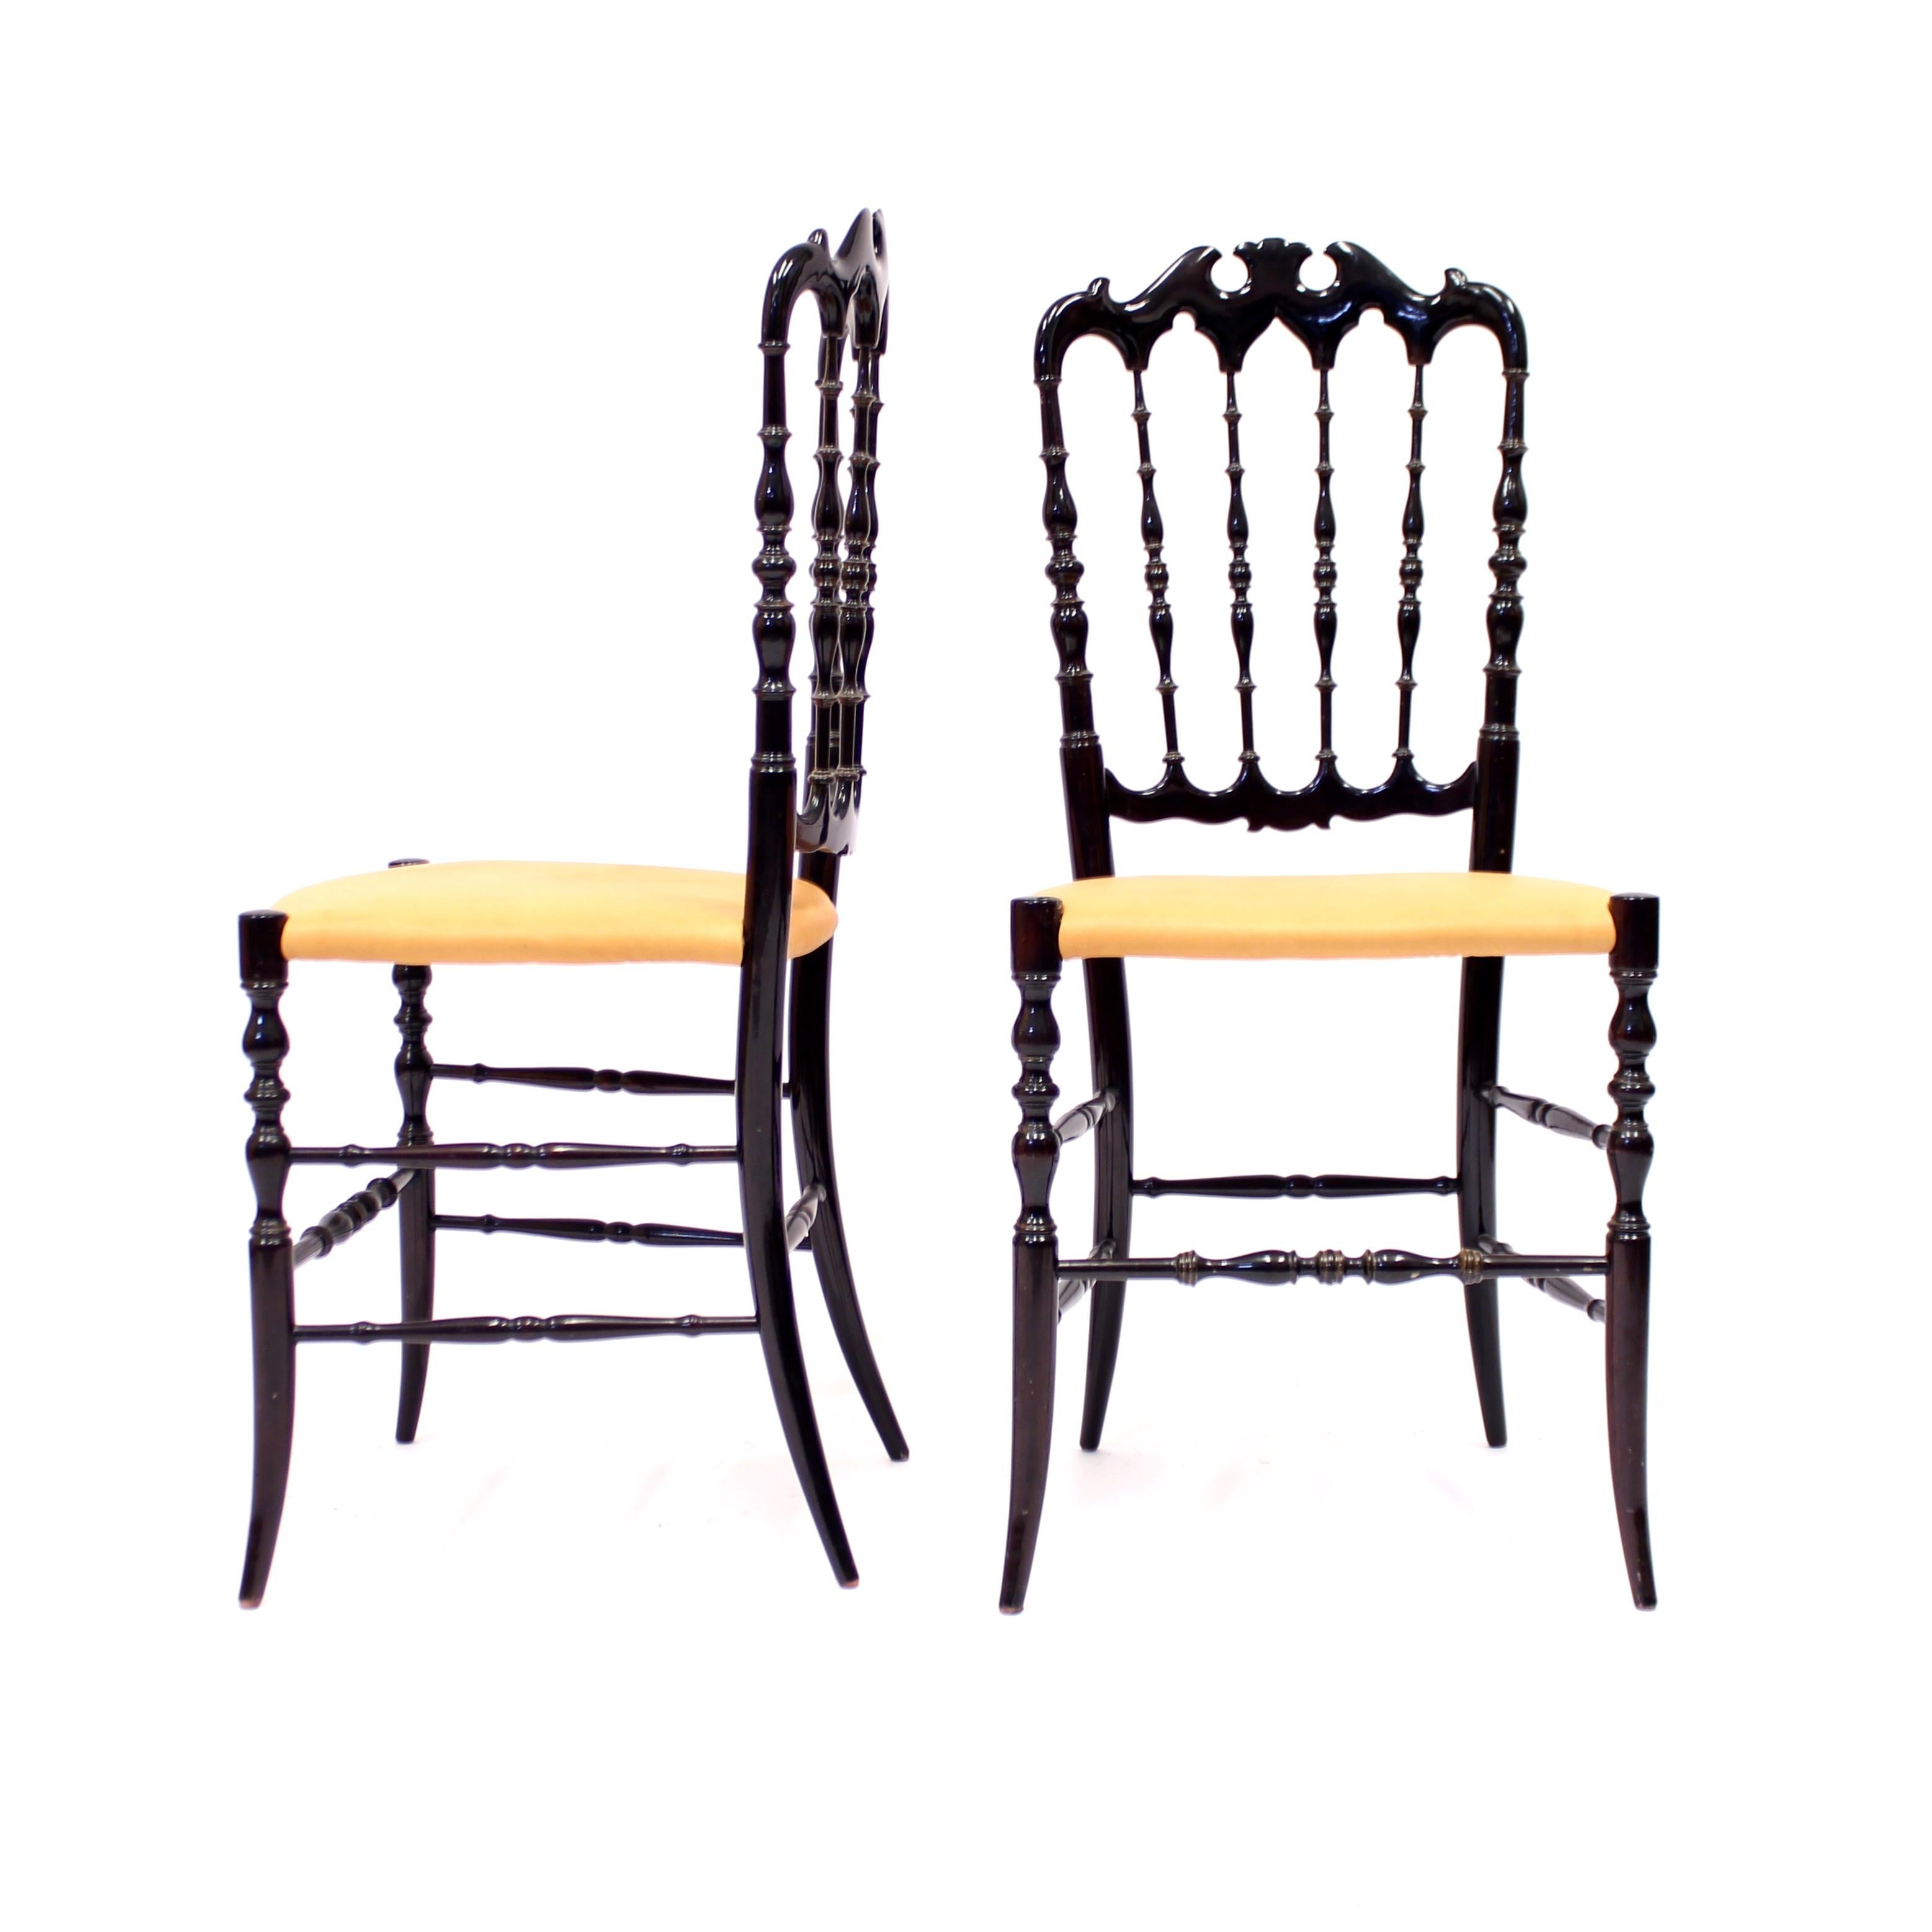 Pair of Vintage Chiavari Chairs with Leather Seats, circa 1950 2